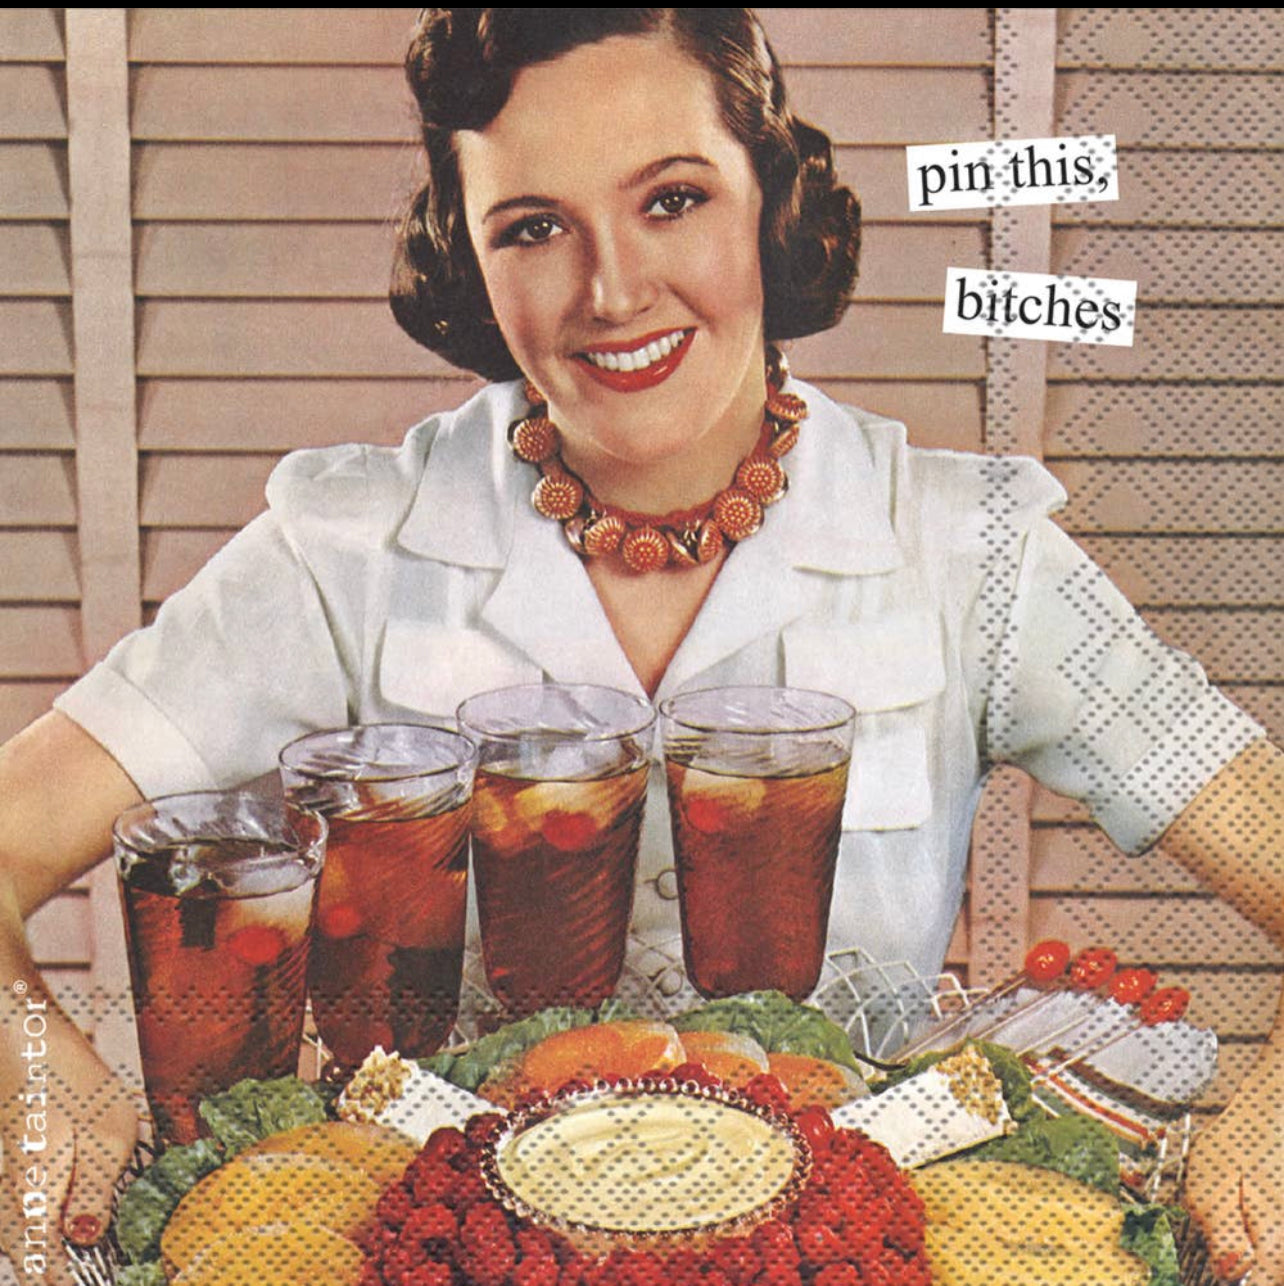 5" x 5" square napkin featuring a nostalgic 1950's hostess holding a tray of drinks and appetizers with the words "pin this, bitches"